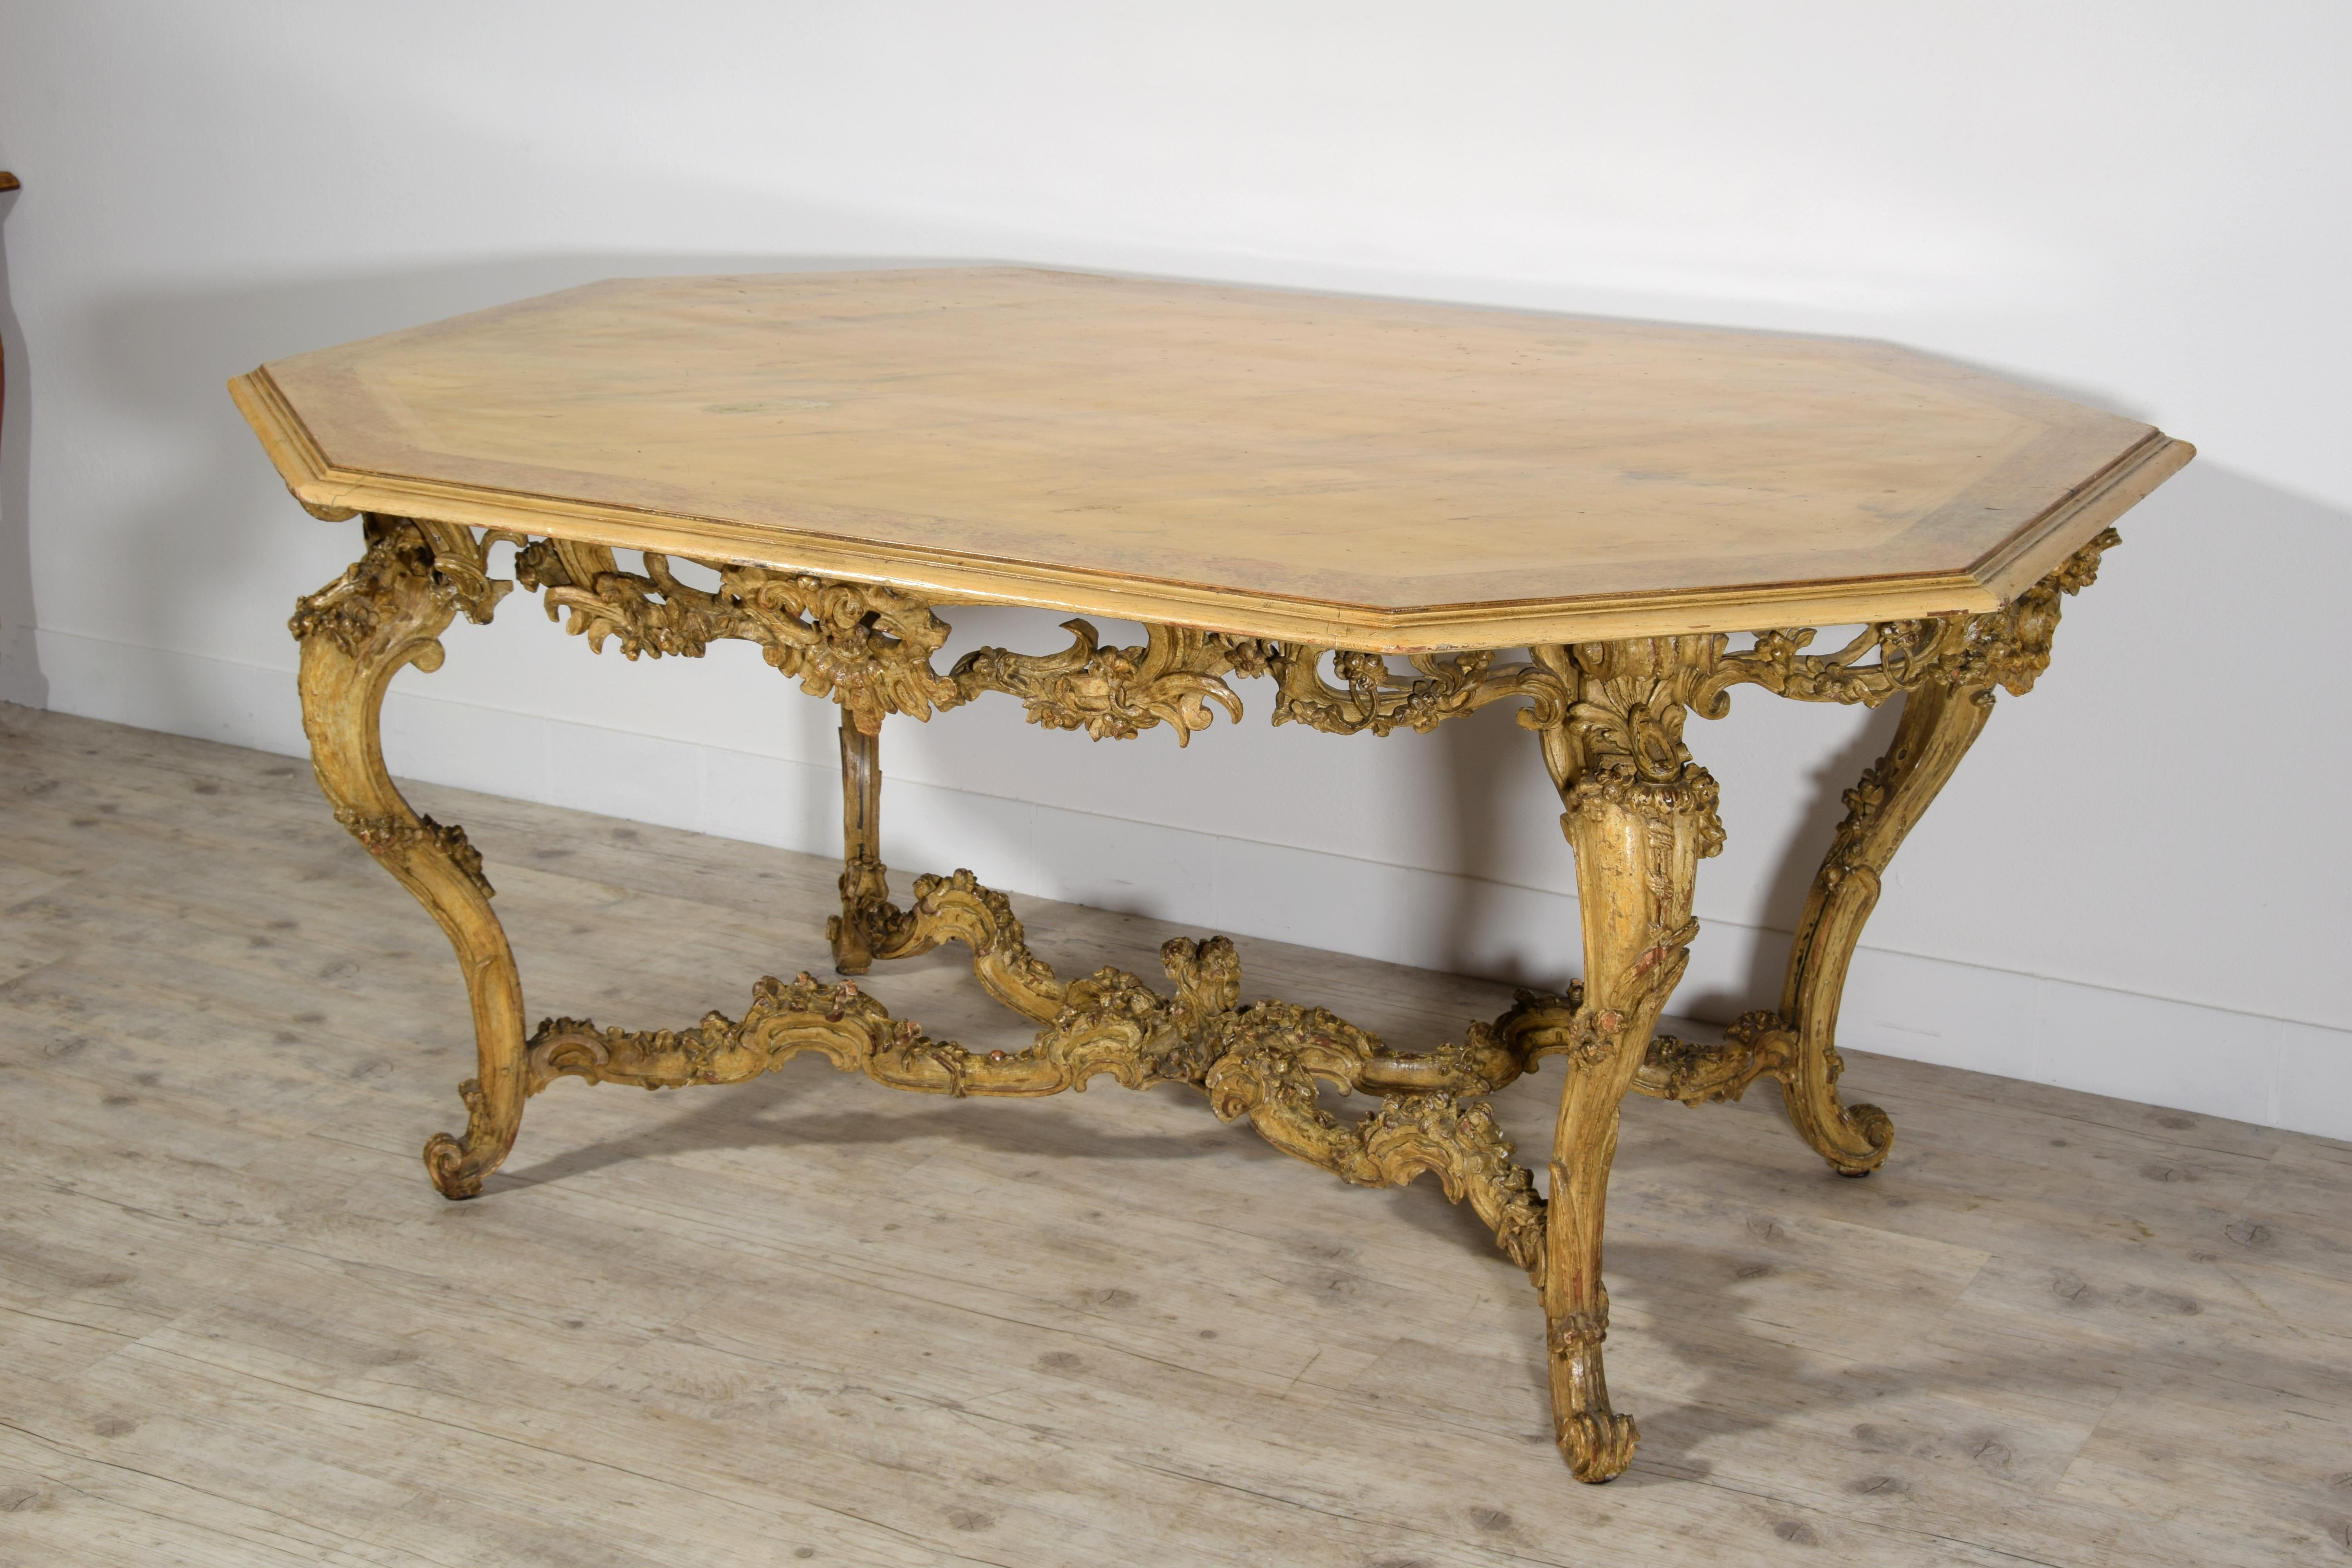 Hand-Carved Italian Baroque Carved Gilt and Lacquered Wood Center Table, 18th Century For Sale